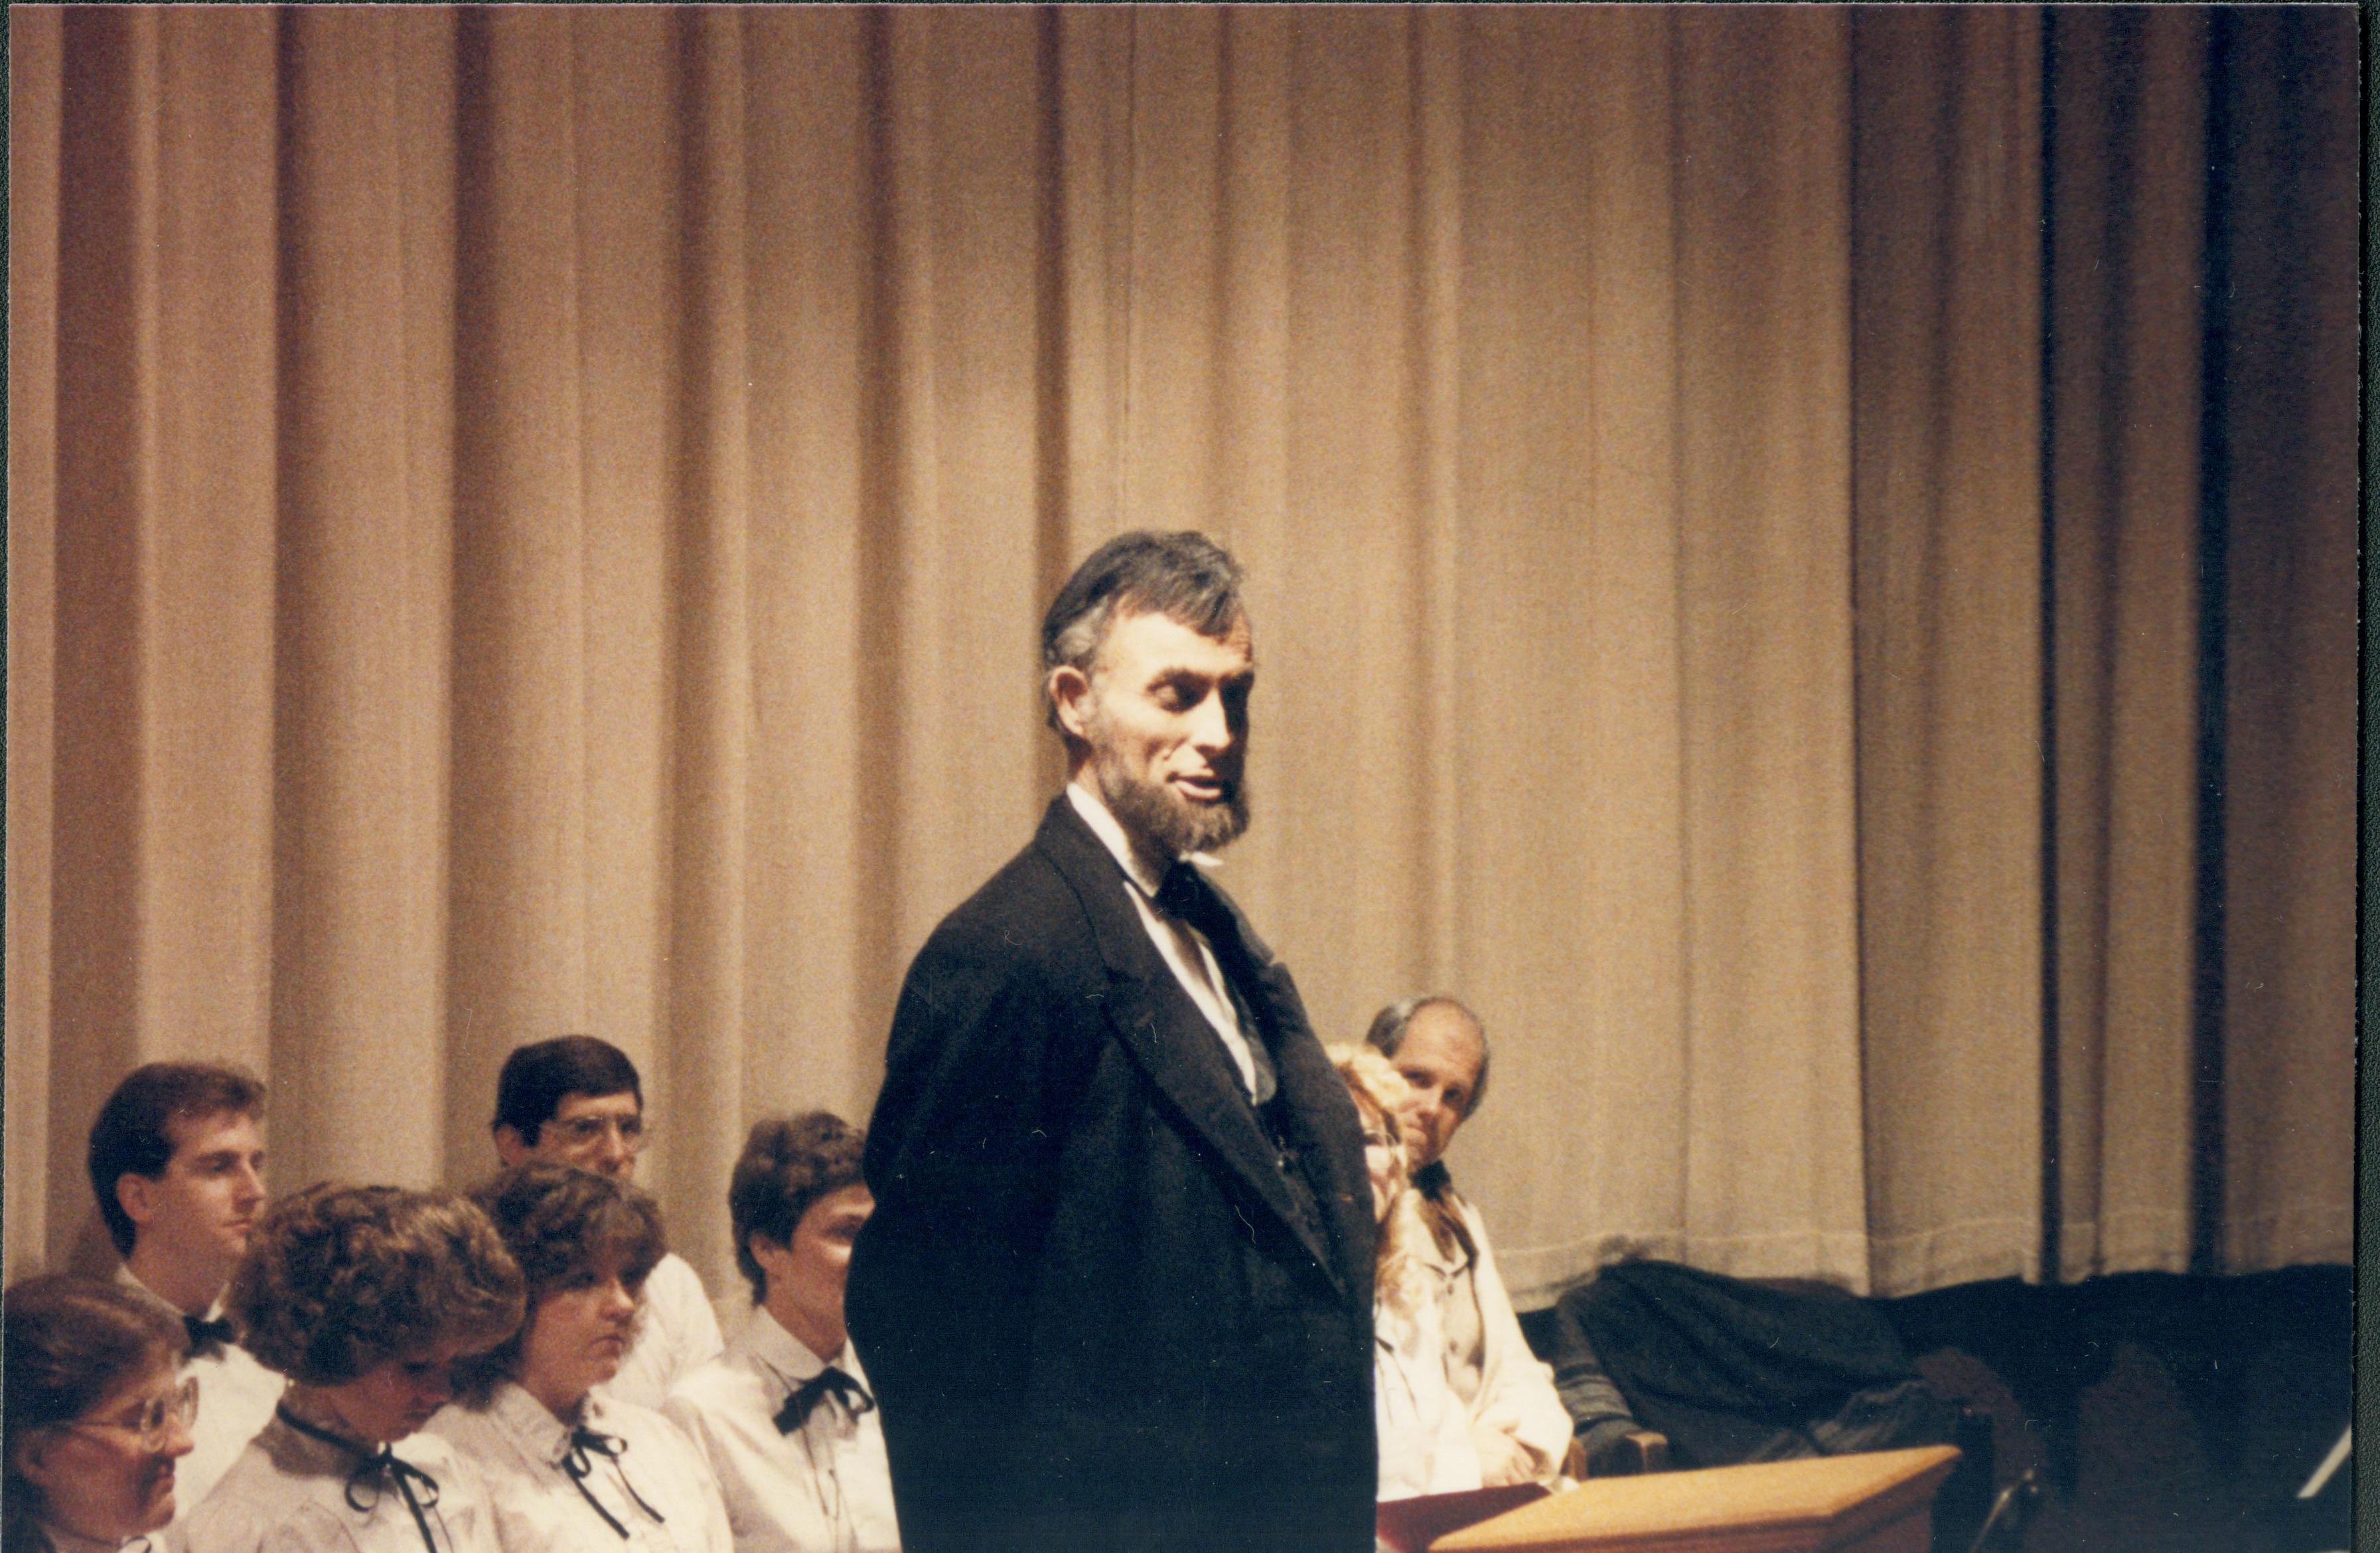 Lincoln impersonator speaking from podium, choral group seated behind. Lincoln Home NHS- Lincoln's Birthday 1988 birthday, Lincoln, Douglas